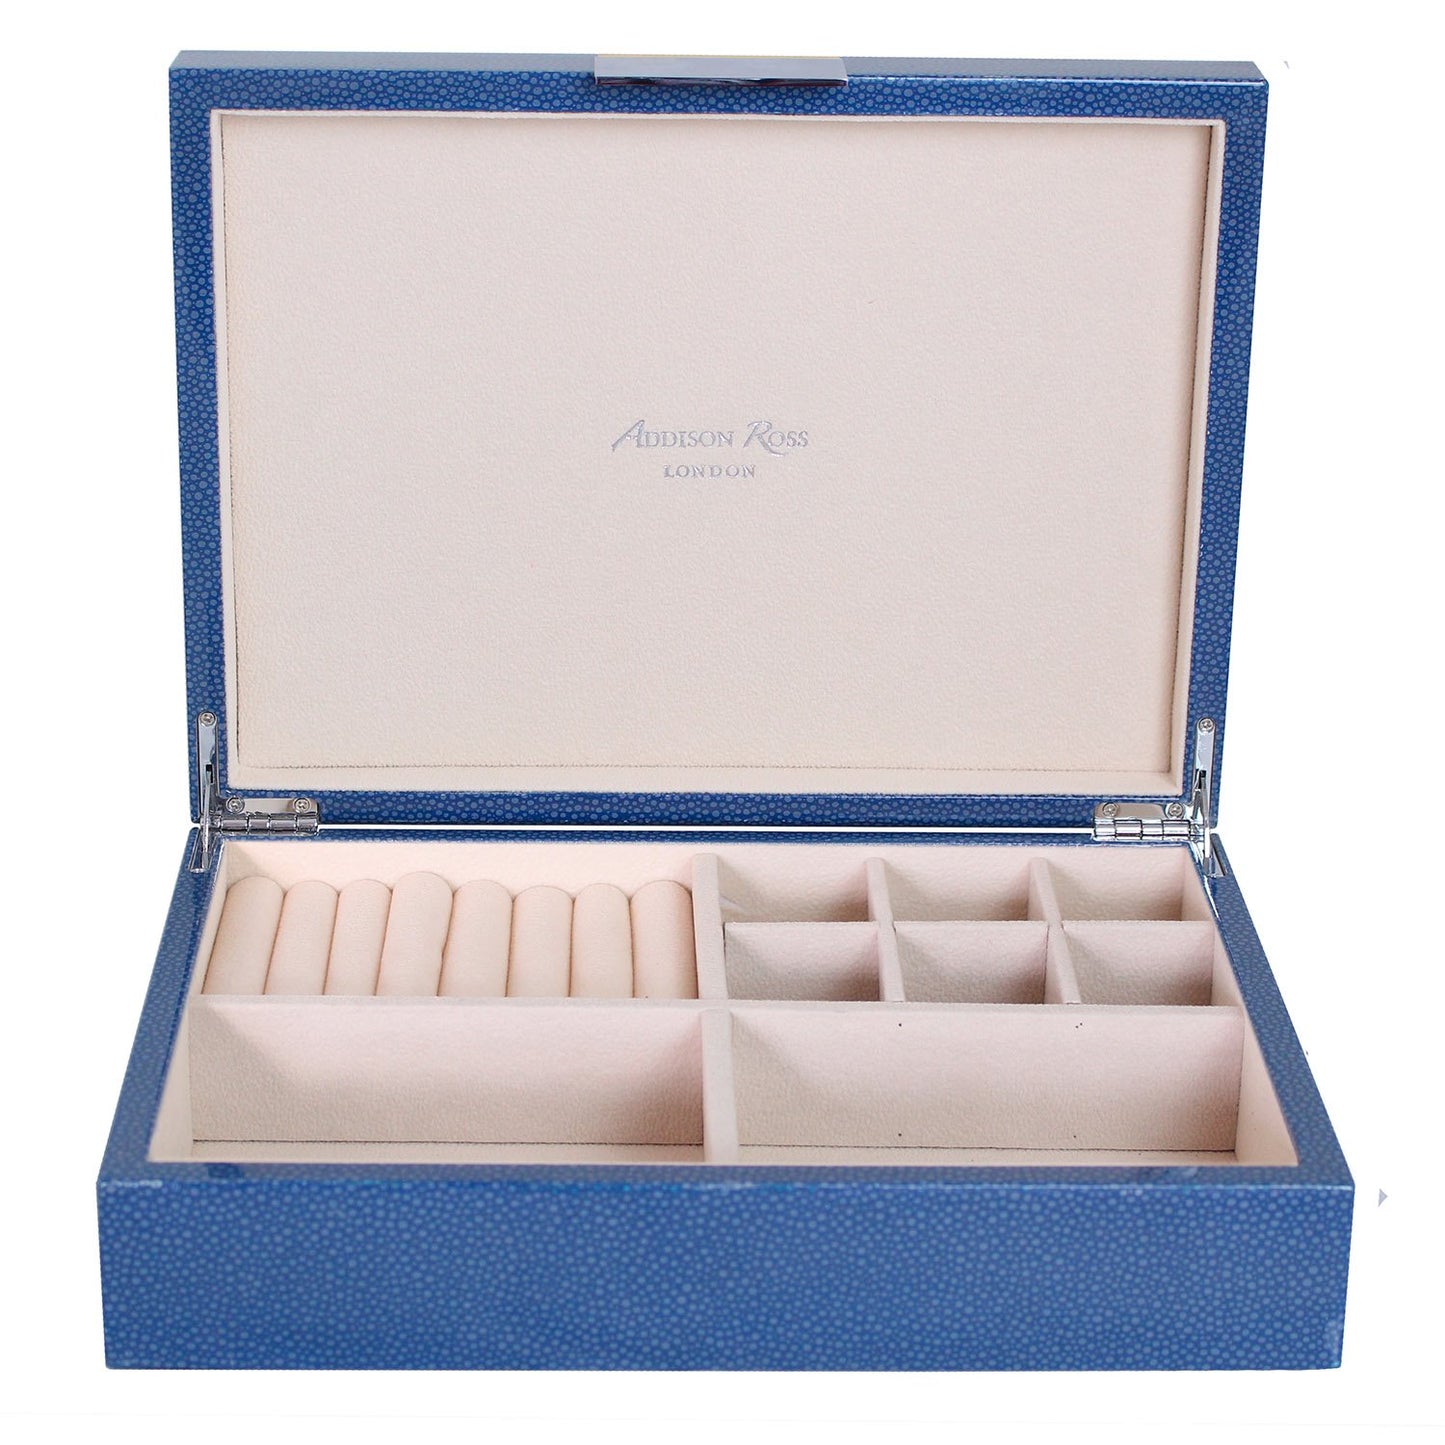 Large blue jewelry box with cream suede interior